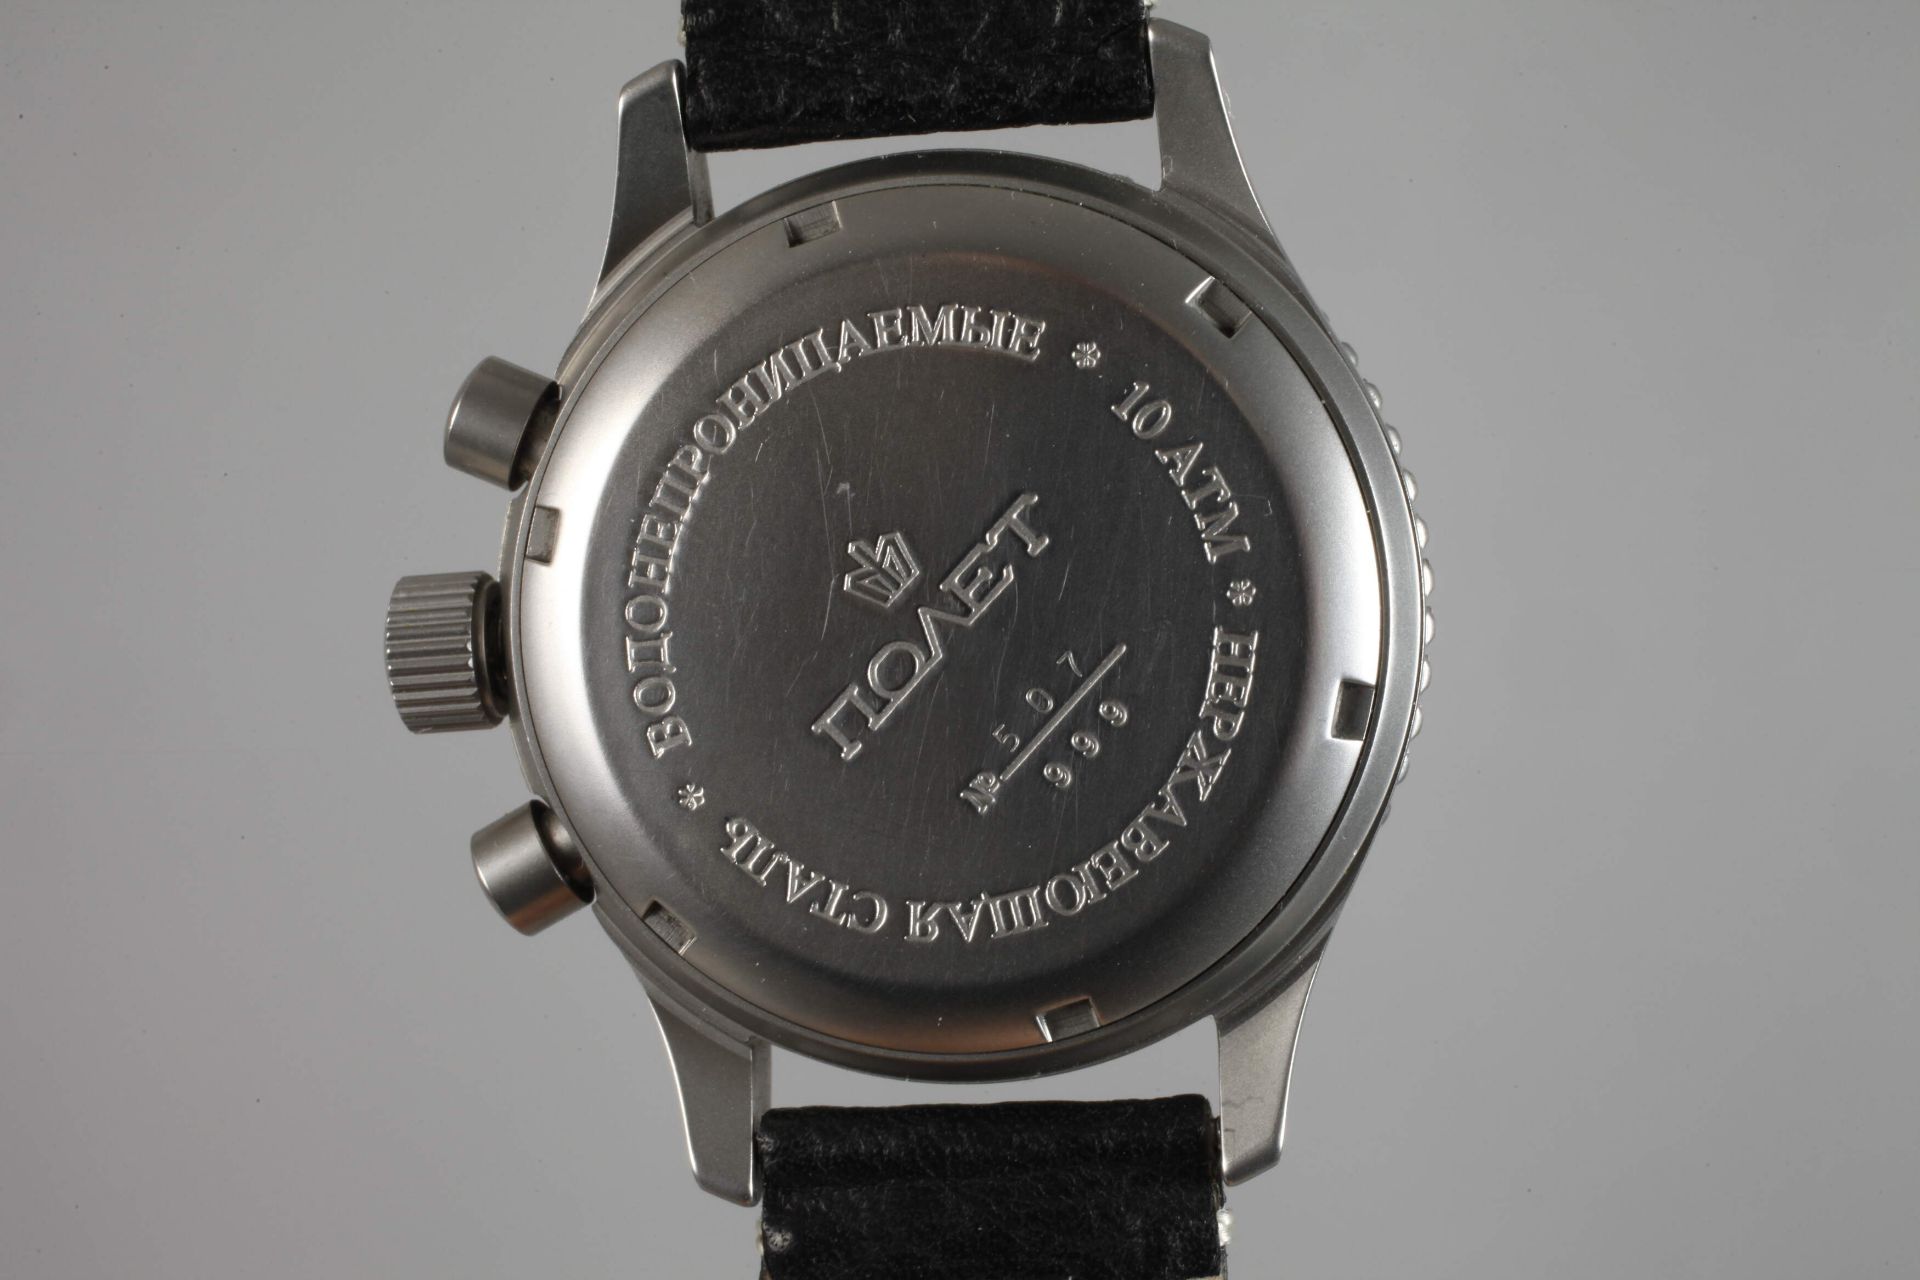 Chronograph Polet - Image 2 of 3